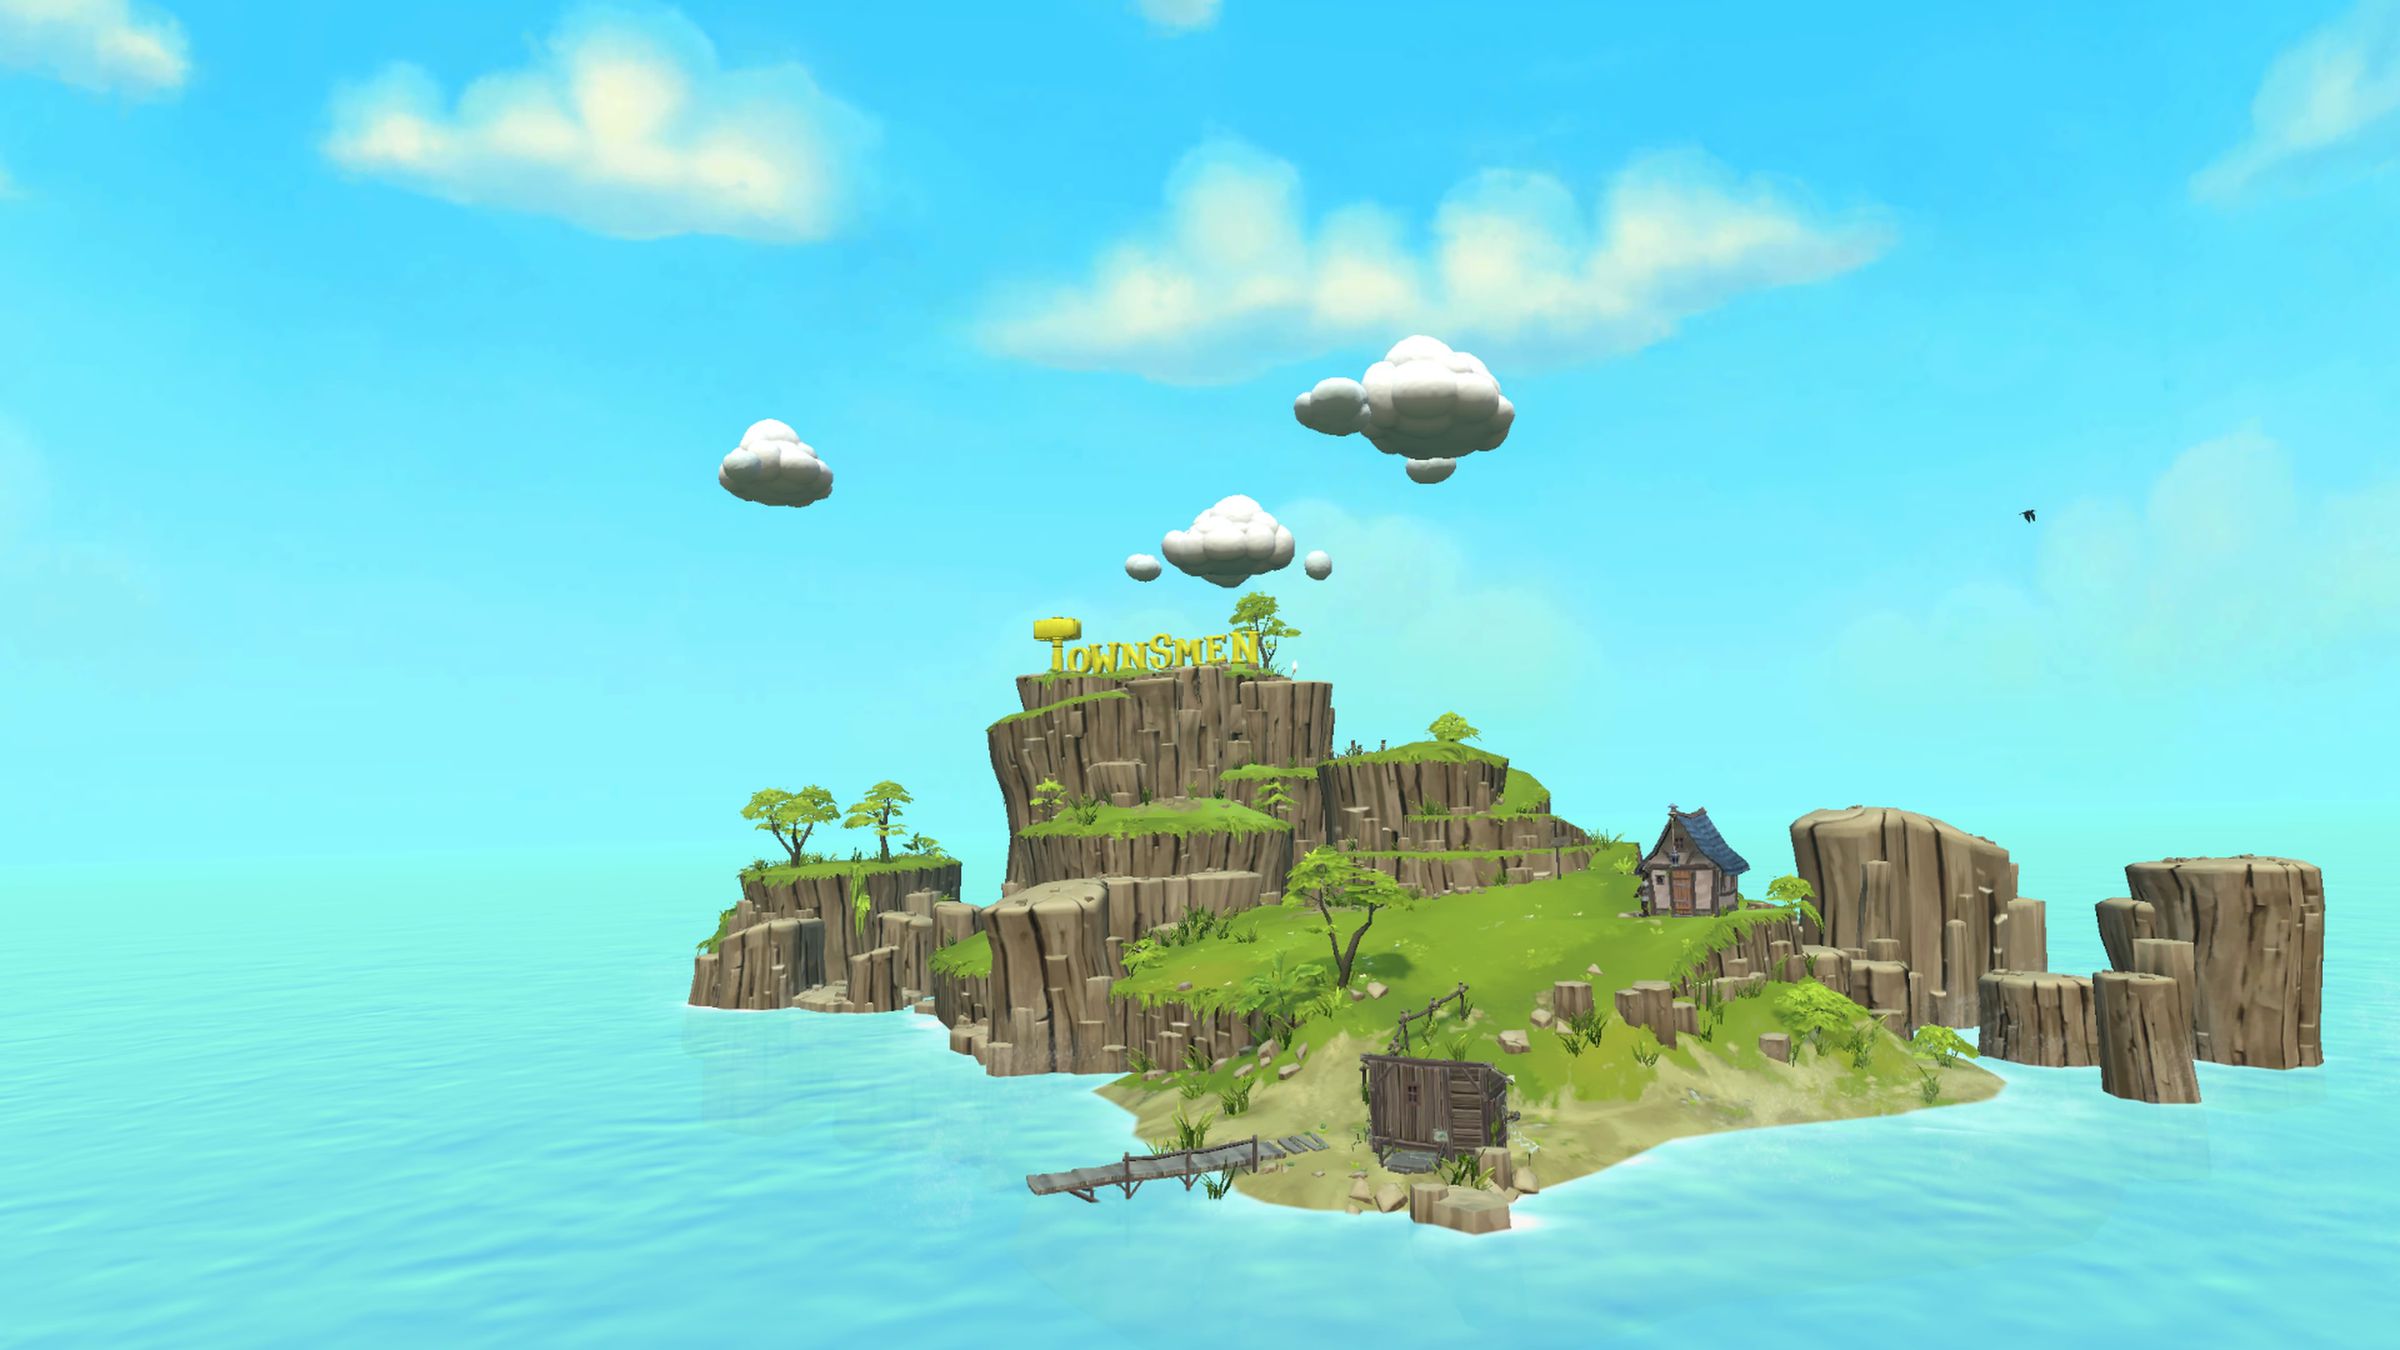 Floating over an island with rudimentary cottages